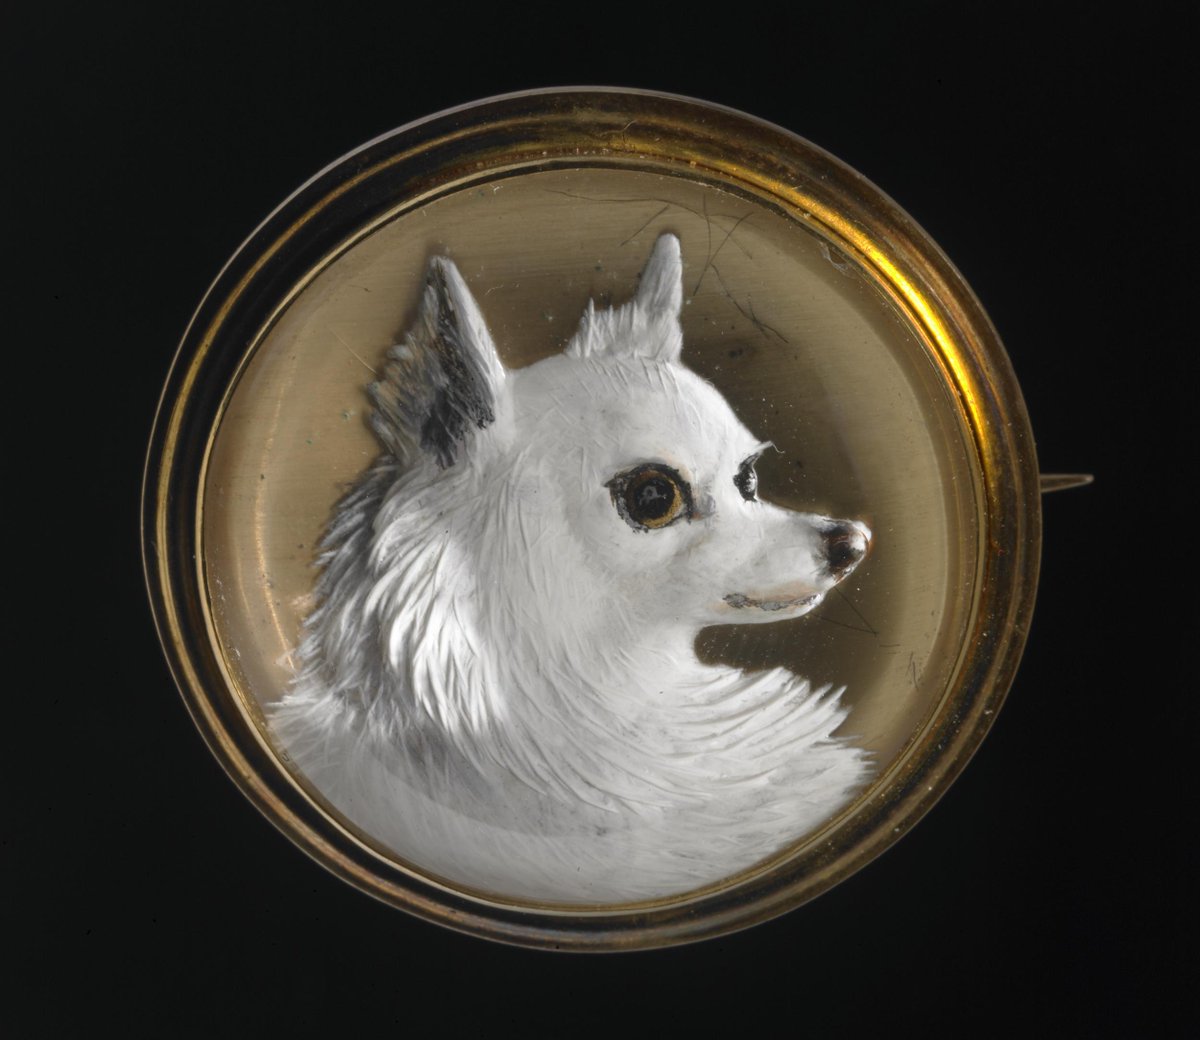 Day nine of  #NationalPetMonth. A Victorian mourning brooch for a little Spitz dog, with a lock of white dog fur in the back, with the inscription "FAITHFUL & TRUE/ MUFF Obit. Nov. 24th 1862 at Dinapore. Aged 8 Years & 6 Months" (British Museum no. 1978,1002.201)